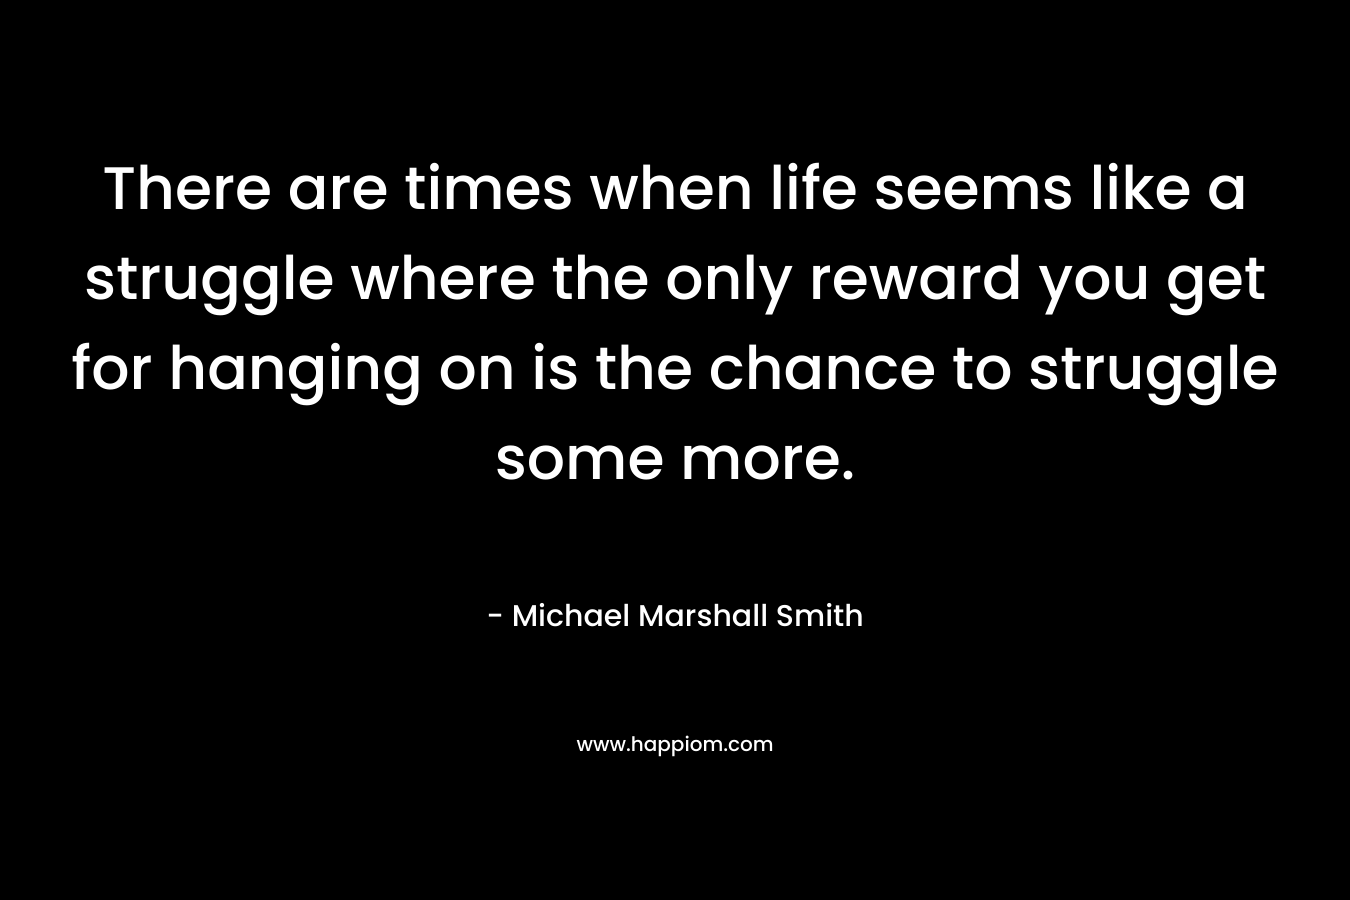 There are times when life seems like a struggle where the only reward you get for hanging on is the chance to struggle some more.